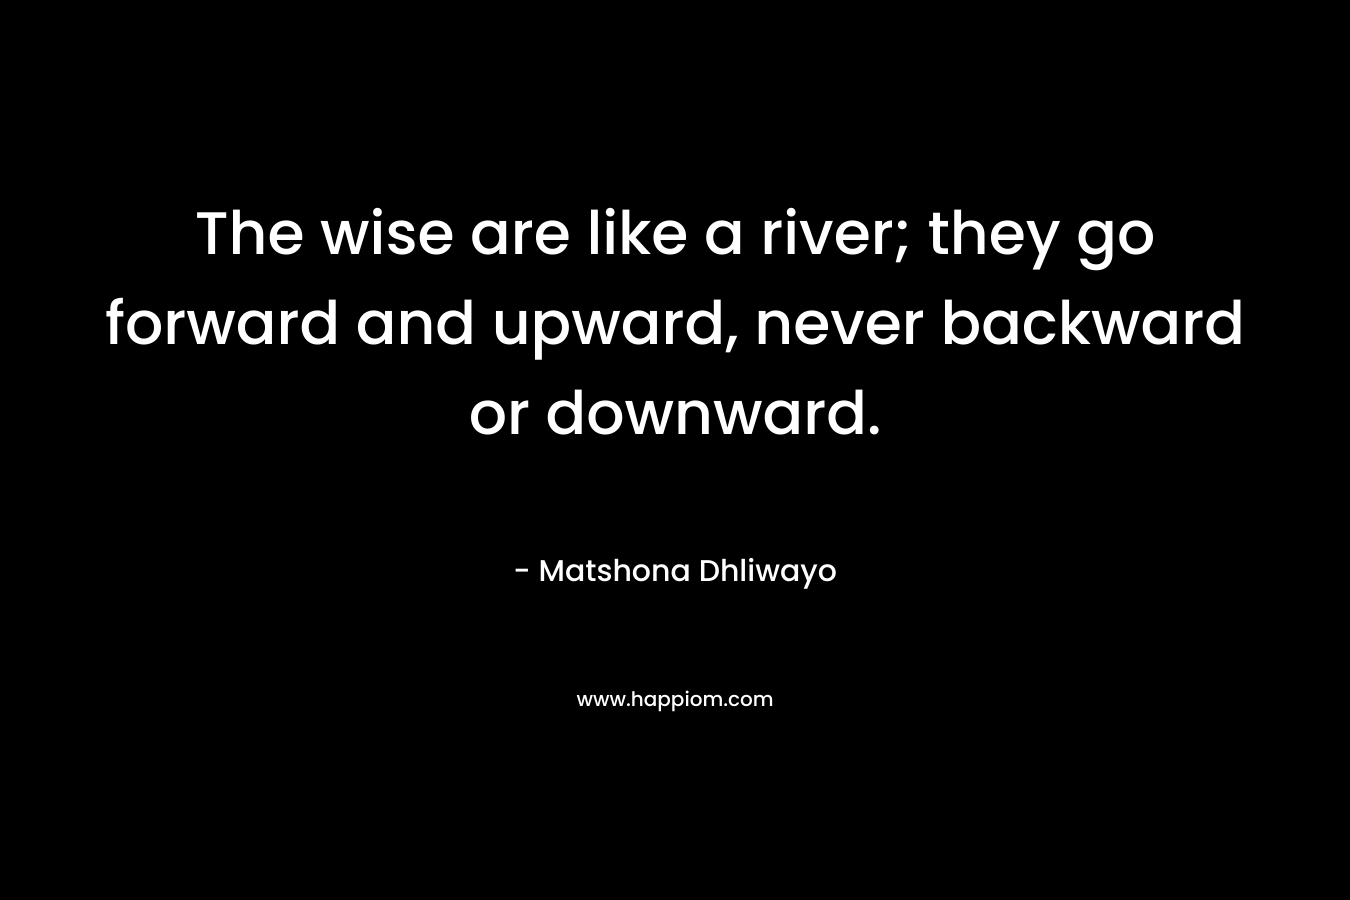 The wise are like a river; they go forward and upward, never backward or downward. – Matshona Dhliwayo